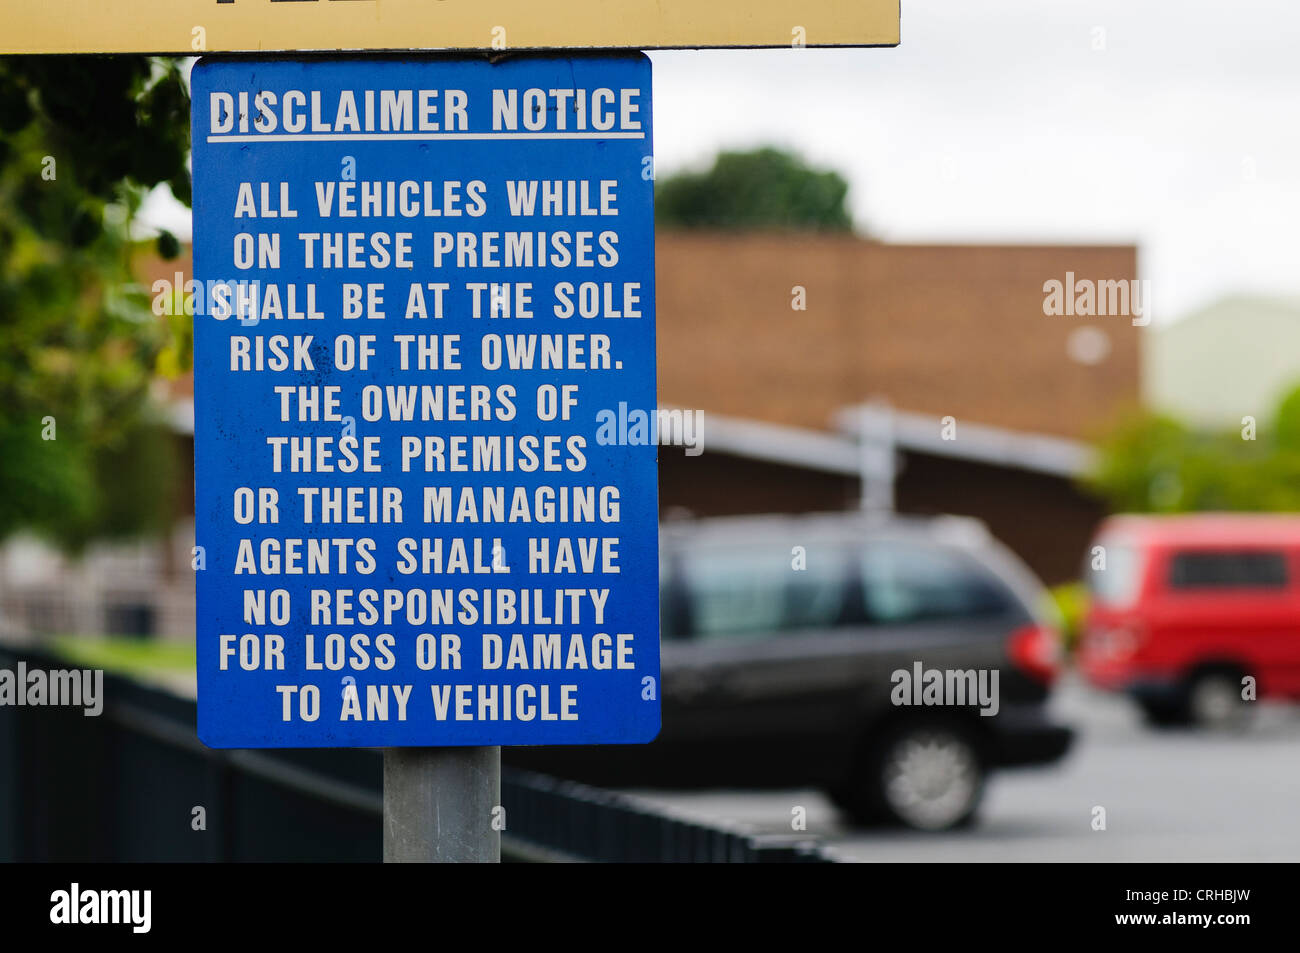 Disclaimer notice at a car park Stock Photo